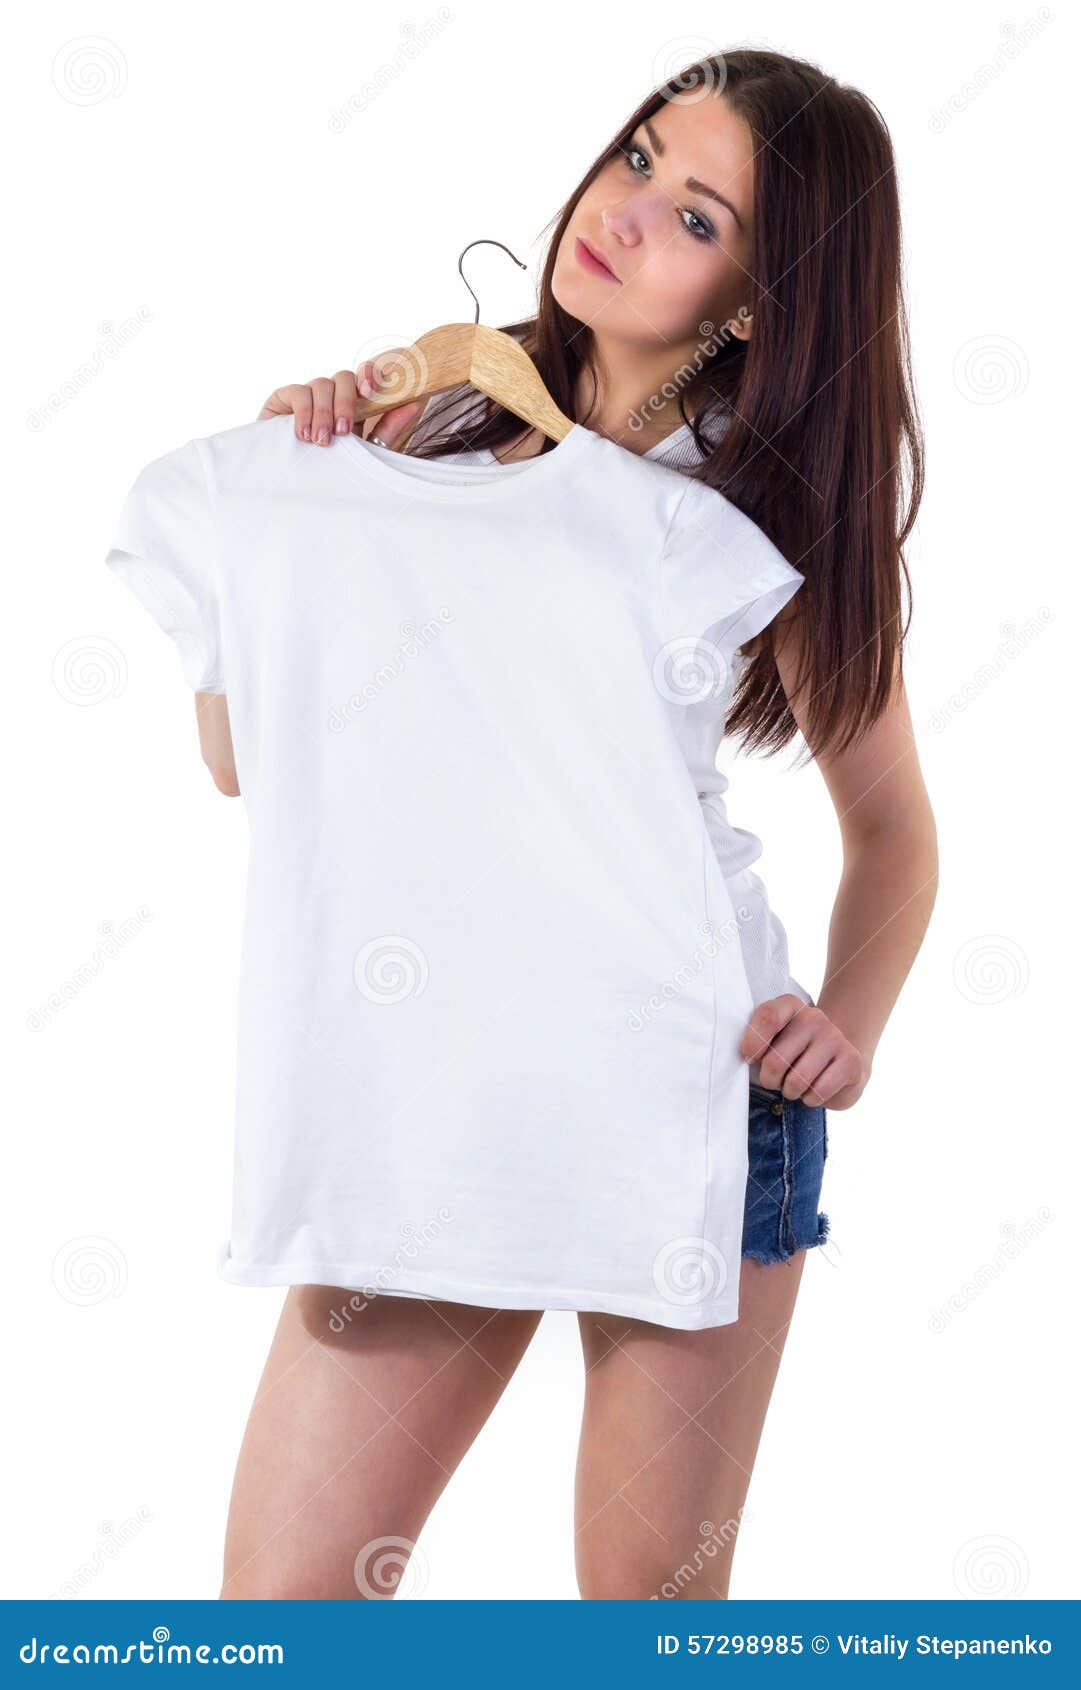 Download Girl With T-shirt Mock-up Stock Photo - Image: 57298985